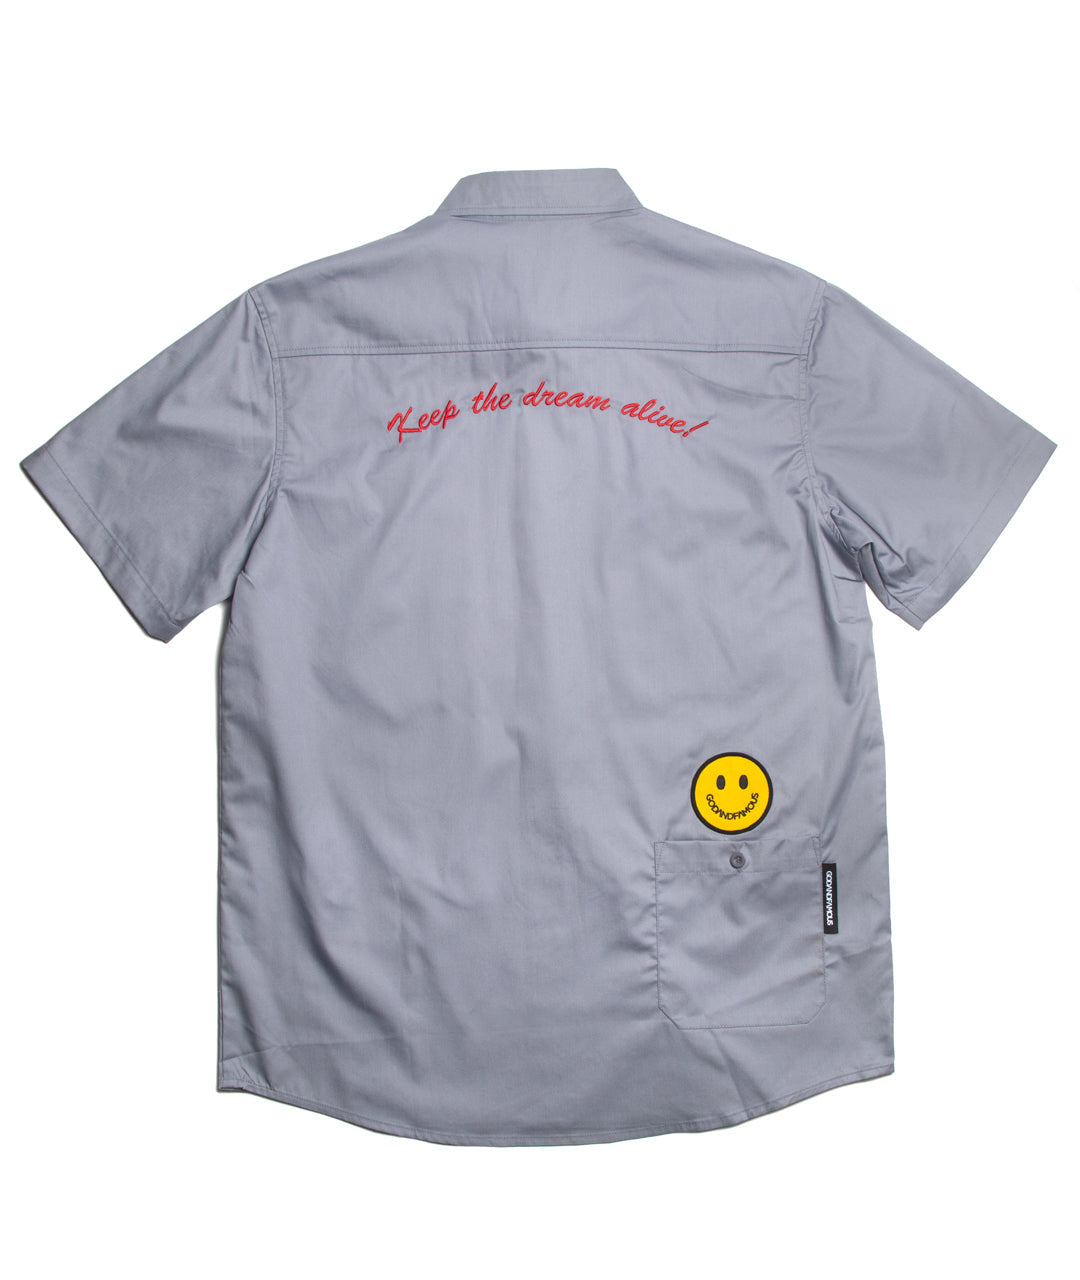 Fred Workshirt - Janitor Gray